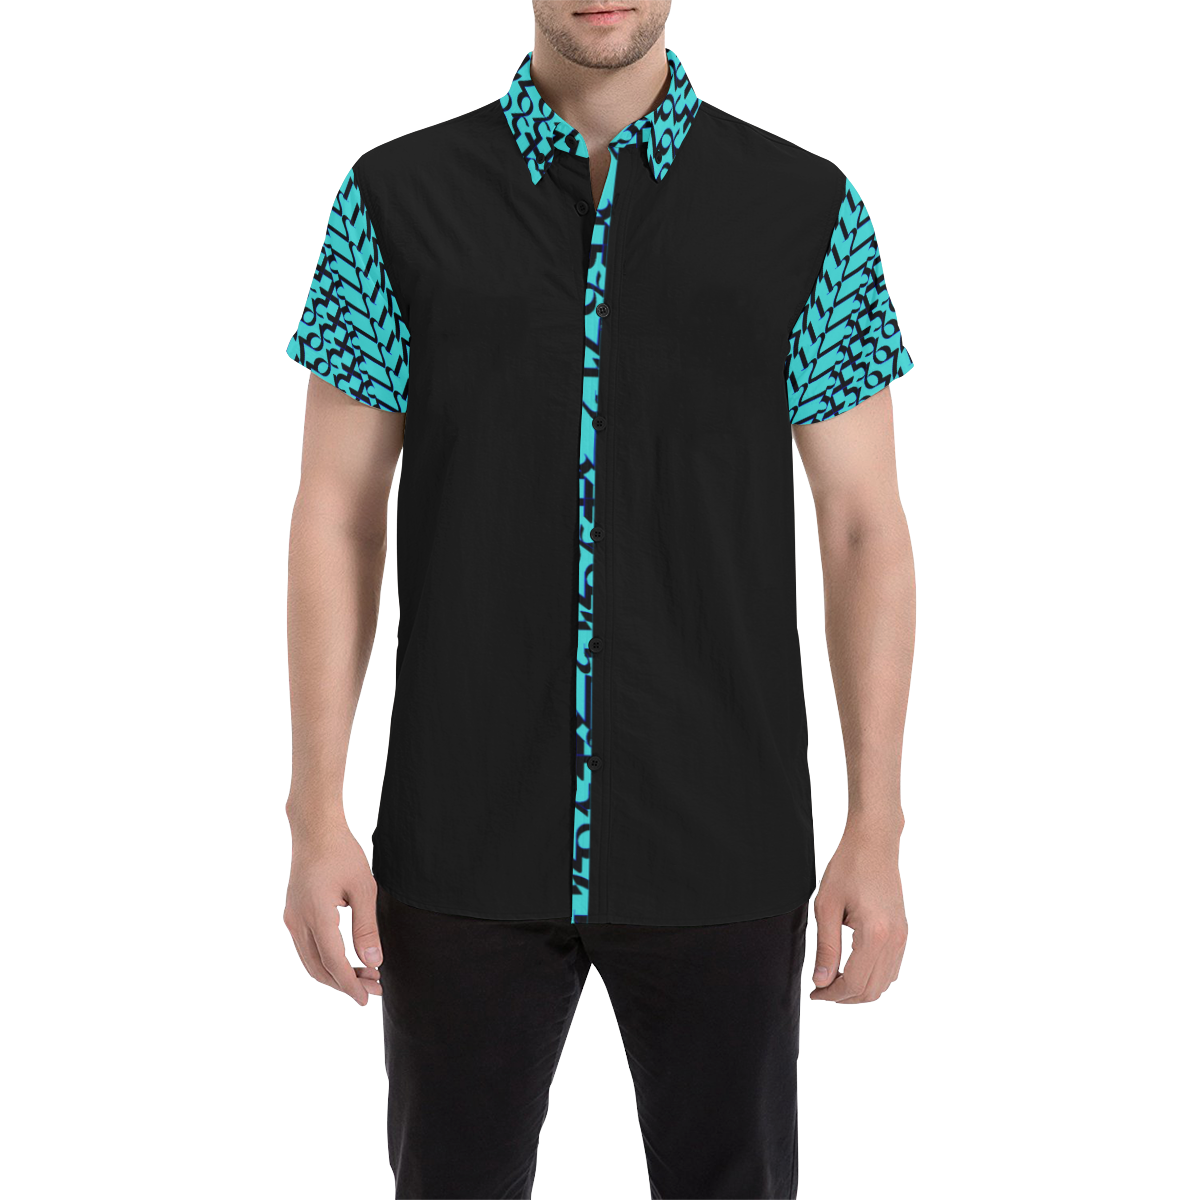 NUMBERS Collection 1234567 Black/New Green Men's All Over Print Short Sleeve Shirt (Model T53)